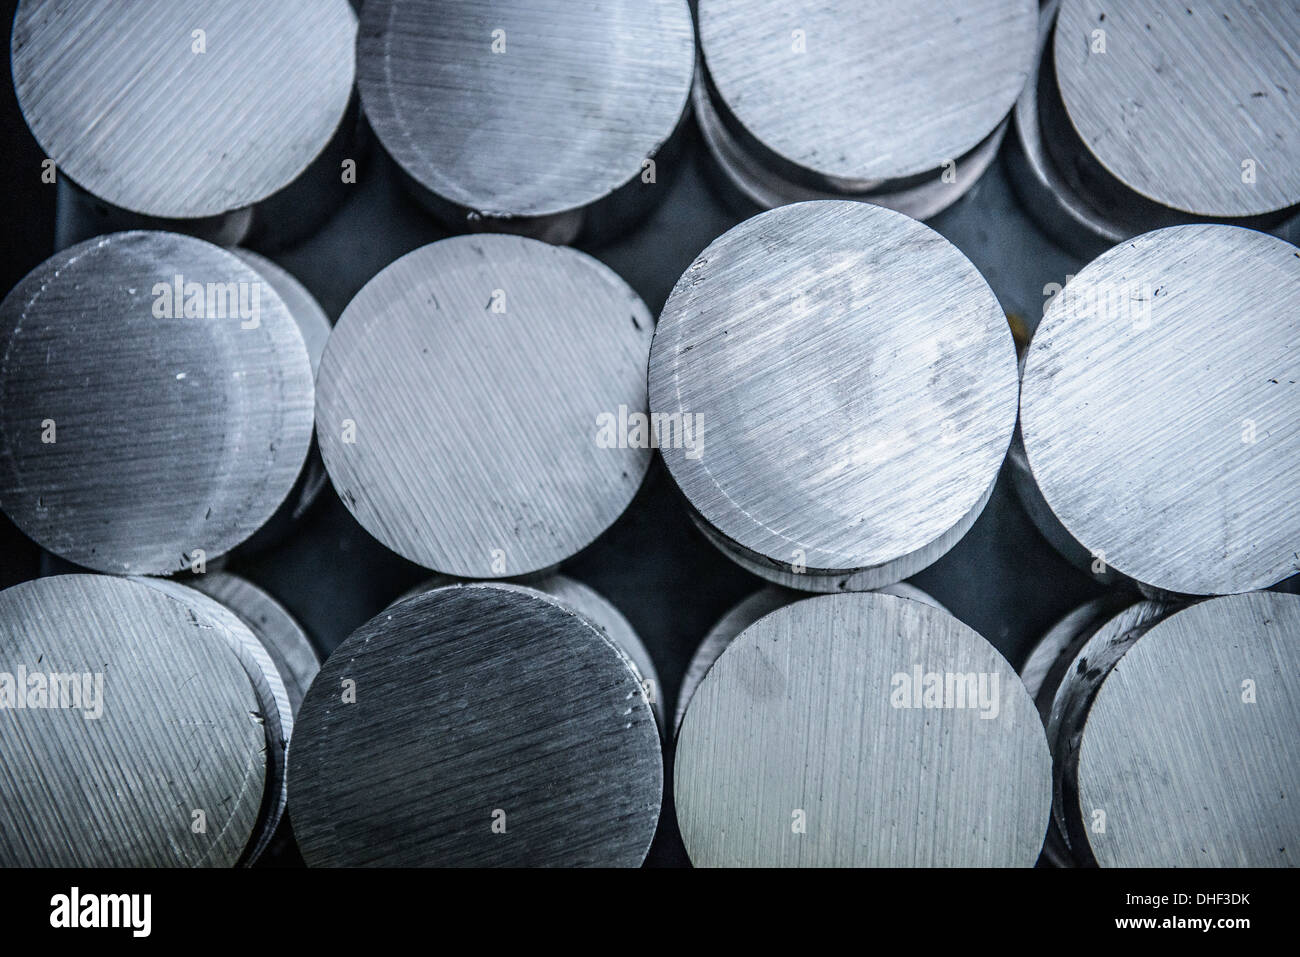 Stacks of raw and unworked steel discs in factory, overhead view Stock Photo